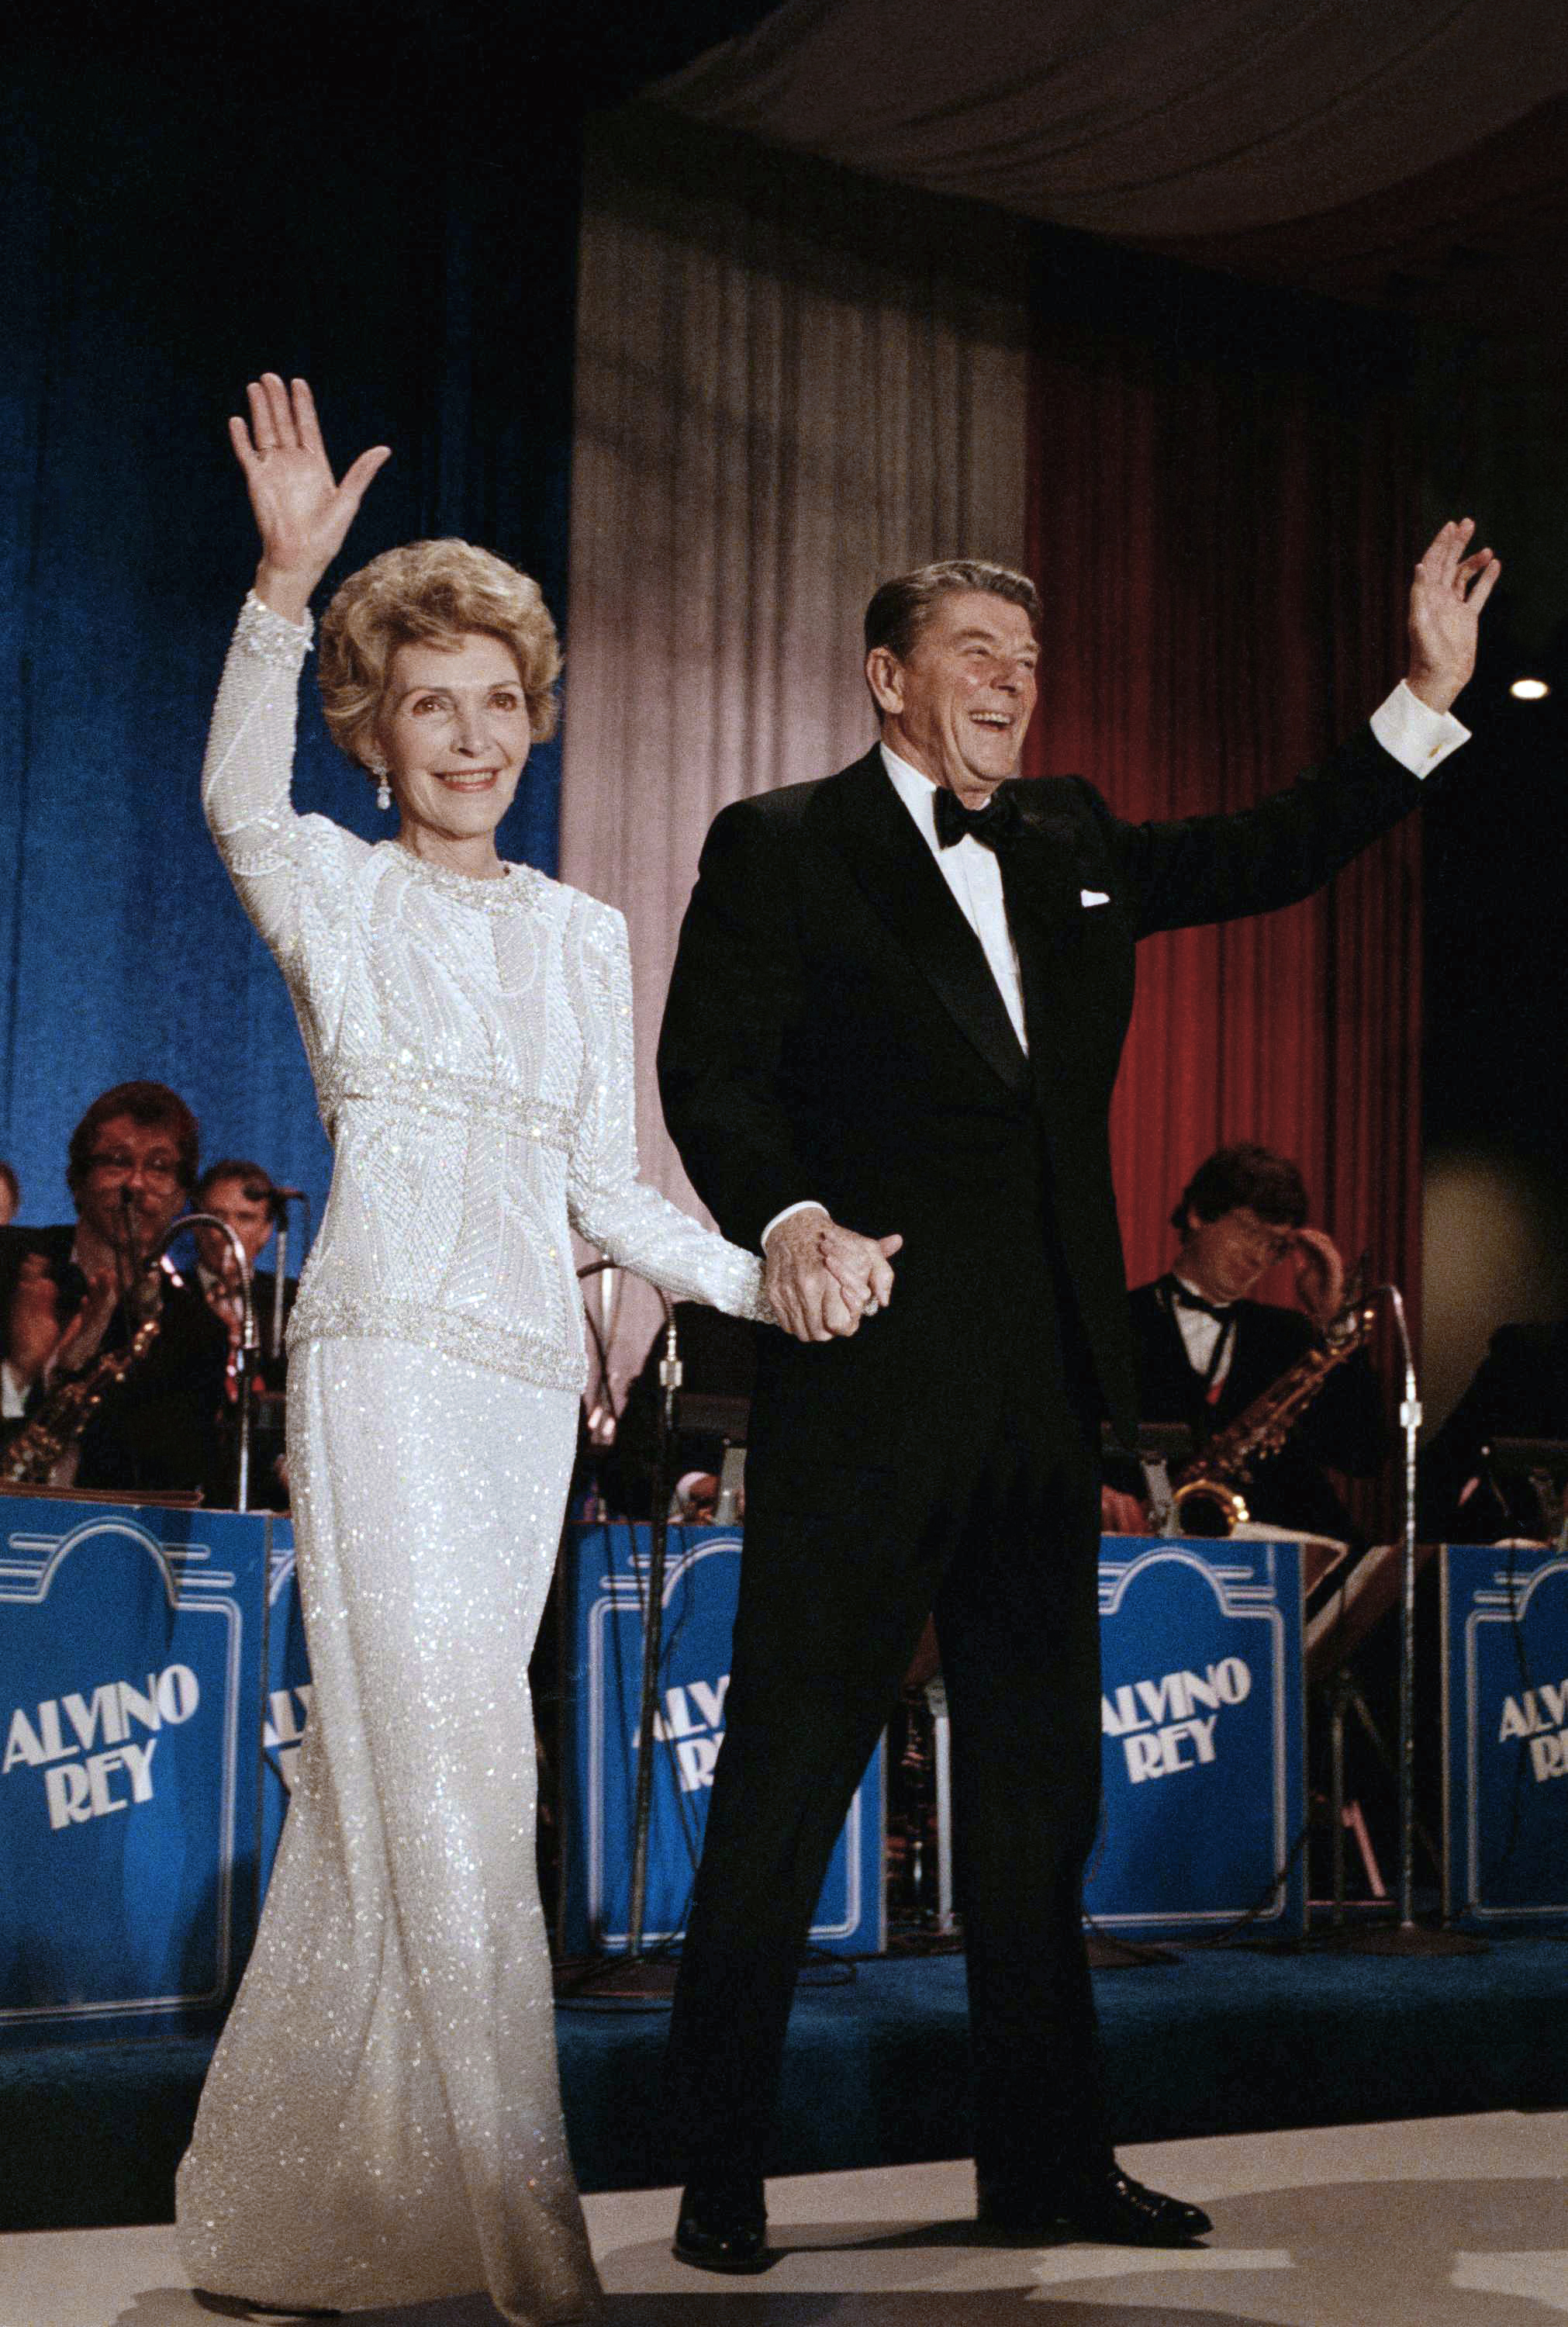 Nancy Reagan, James Galanos, 1985: The designer and his staff reportedly spent over 300 hours embroidering the beads onto this gown, and some news outlets estimated that her entire outfit cost $46,000.